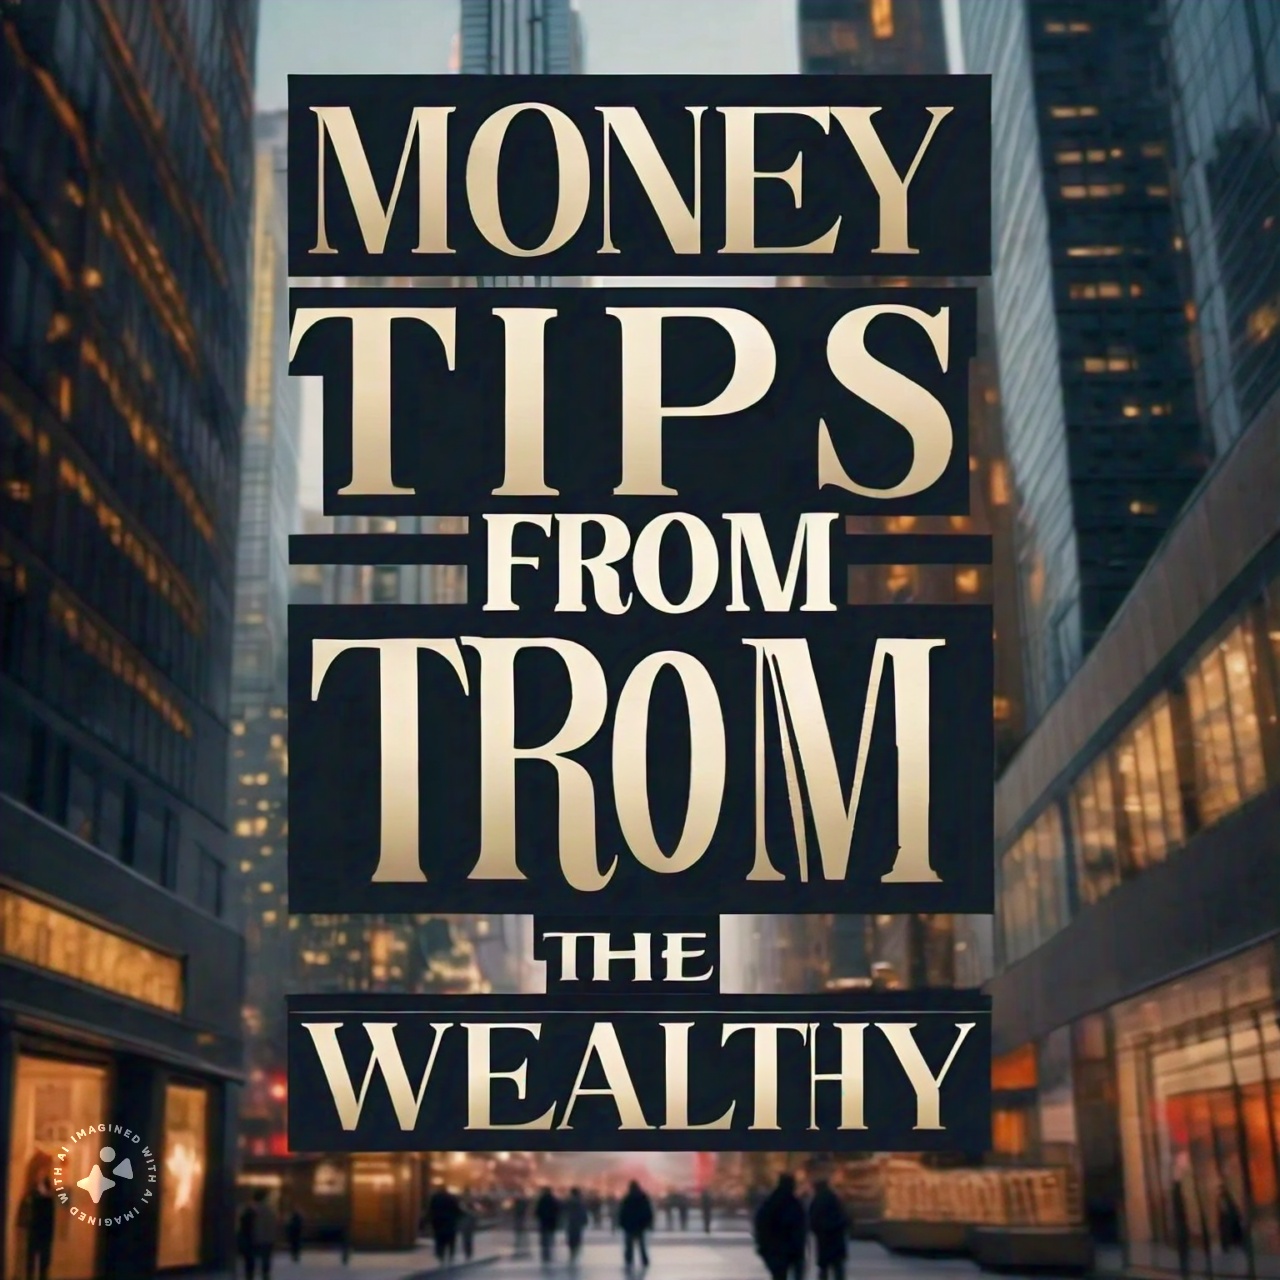 Money tips from Trom the Wealthy banner